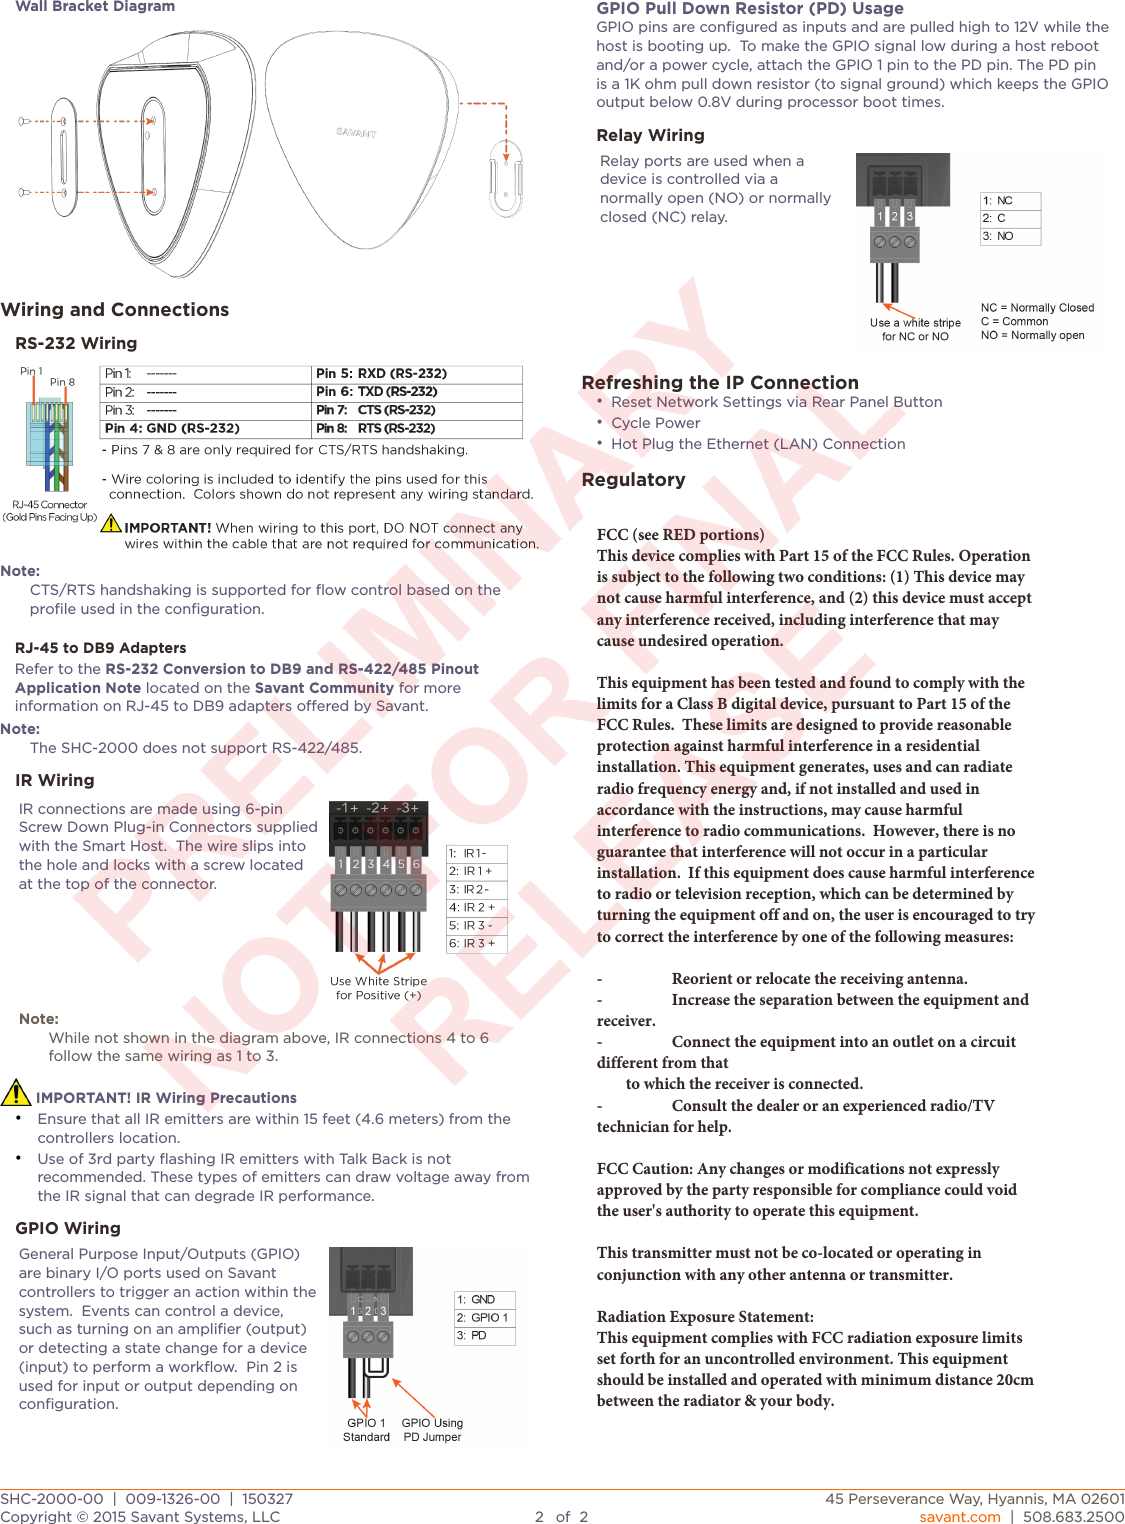 Wall Bracket DiagramWiring and ConnectionsRS-232 WiringNote:CTS/RTS handshaking is supported for ﬂow control based on the proﬁle used in the conﬁguration.RJ-45 to DB9 AdaptersRefer to the RS-232 Conversion to DB9 and RS-422/485 Pinout Application Note located on the Savant Community for more information on RJ-45 to DB9 adapters oered by Savant.Note:The SHC-2000 does not support RS-422/485.IR WiringIR connections are made using 6-pin Screw Down Plug-in Connectors supplied with the Smart Host.  The wire slips into the hole and locks with a screw located at the top of the connector.Note:While not shown in the diagram above, IR connections 4 to 6 follow the same wiring as 1 to 3.Note:While not shown in the diagram above, IR connections 4 to 6 follow the same wiring as 1 to 3. IMPORTANT! IR Wiring Precautions•Ensure that all IR emitters are within 15 feet (4.6 meters) from thecontrollers location.•Use of 3rd party ﬂashing IR emitters with Talk Back is notrecommended. These types of emitters can draw voltage away from the IR signal that can degrade IR performance.GPIO WiringGeneral Purpose Input/Outputs (GPIO) are binary I/O ports used on Savant controllers to trigger an action within the system.  Events can control a device, such as turning on an ampliﬁer (output) or detecting a state change for a device (input) to perform a workﬂow.  Pin 2 is used for input or output depending on conﬁguration.GPIO Pull Down Resistor (PD) UsageGPIO pins are conﬁgured as inputs and are pulled high to 12V while the host is booting up.  To make the GPIO signal low during a host reboot and/or a power cycle, attach the GPIO 1 pin to the PD pin. The PD pin is a 1K ohm pull down resistor (to signal ground)which keeps the GPIO output below 0.8V during processor boot times.Relay WiringRelay ports are used when a device is controlled via a normally open (NO) or normally closed (NC) relay.Refreshing the IP Connection•Reset Network Settings via Rear Panel Button•Cycle Power•Hot Plug the Ethernet (LAN) ConnectionRegulatoryFCC (see RED portions)This device complies with Part 15 of the FCC Rules. Operation is subject to the following two conditions: (1) This device may not cause harmful interference, and (2) this device must accept any interference received, including interference that may cause undesired operation.This equipment has been tested and found to comply with the limits for a Class B digital device, pursuant to Part 15 of the FCC Rules.  These limits are designed to provide reasonable protection against harmful interference in a residential installation. This equipment generates, uses and can radiate radio frequency energy and, if not installed and used in accordance with the instructions, may cause harmful interference to radio communications.  However, there is no guarantee that interference will not occur in a particular installation.  If this equipment does cause harmful interference to radio or television reception, which can be determined by turning the equipment off and on, the user is encouraged to try to correct the interference by one of the following measures:-  Reorient or relocate the receiving antenna.-  Increase the separation between the equipment and receiver.-  Connect the equipment into an outlet on a circuit different from that        to which the receiver is connected.-  Consult the dealer or an experienced radio/TV technician for help.FCC Caution: Any changes or modifications not expressly approved by the party responsible for compliance could void the user&apos;s authority to operate this equipment.This transmitter must not be co-located or operating in conjunction with any other antenna or transmitter.Radiation Exposure Statement:This equipment complies with FCC radiation exposure limits set forth for an uncontrolled environment. This equipment should be installed and operated with minimum distance 20cm between the radiator &amp; your body.SHC-2000-00  |  009-1326-00  |  150327SHC-2000-00  |  009-1326-00  |  15032745 Perseverance Way, Hyannis, MA 02601Copyright © 2015 Savant Systems, LLC2of2savant.com  |  508.683.2500